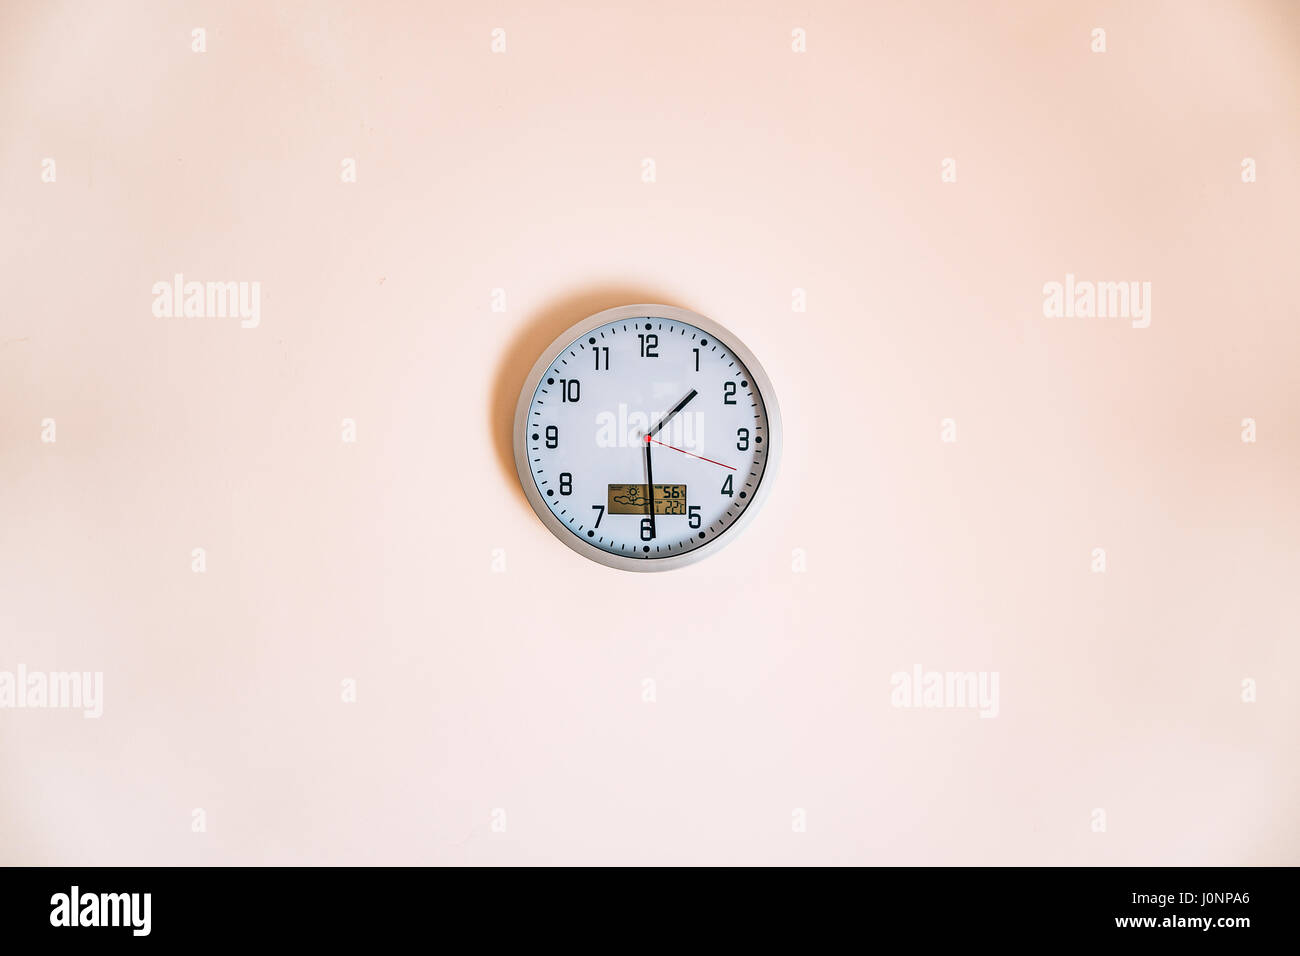 Wall clock in the apartment with a thermometer and weather forecast. Stock Photo